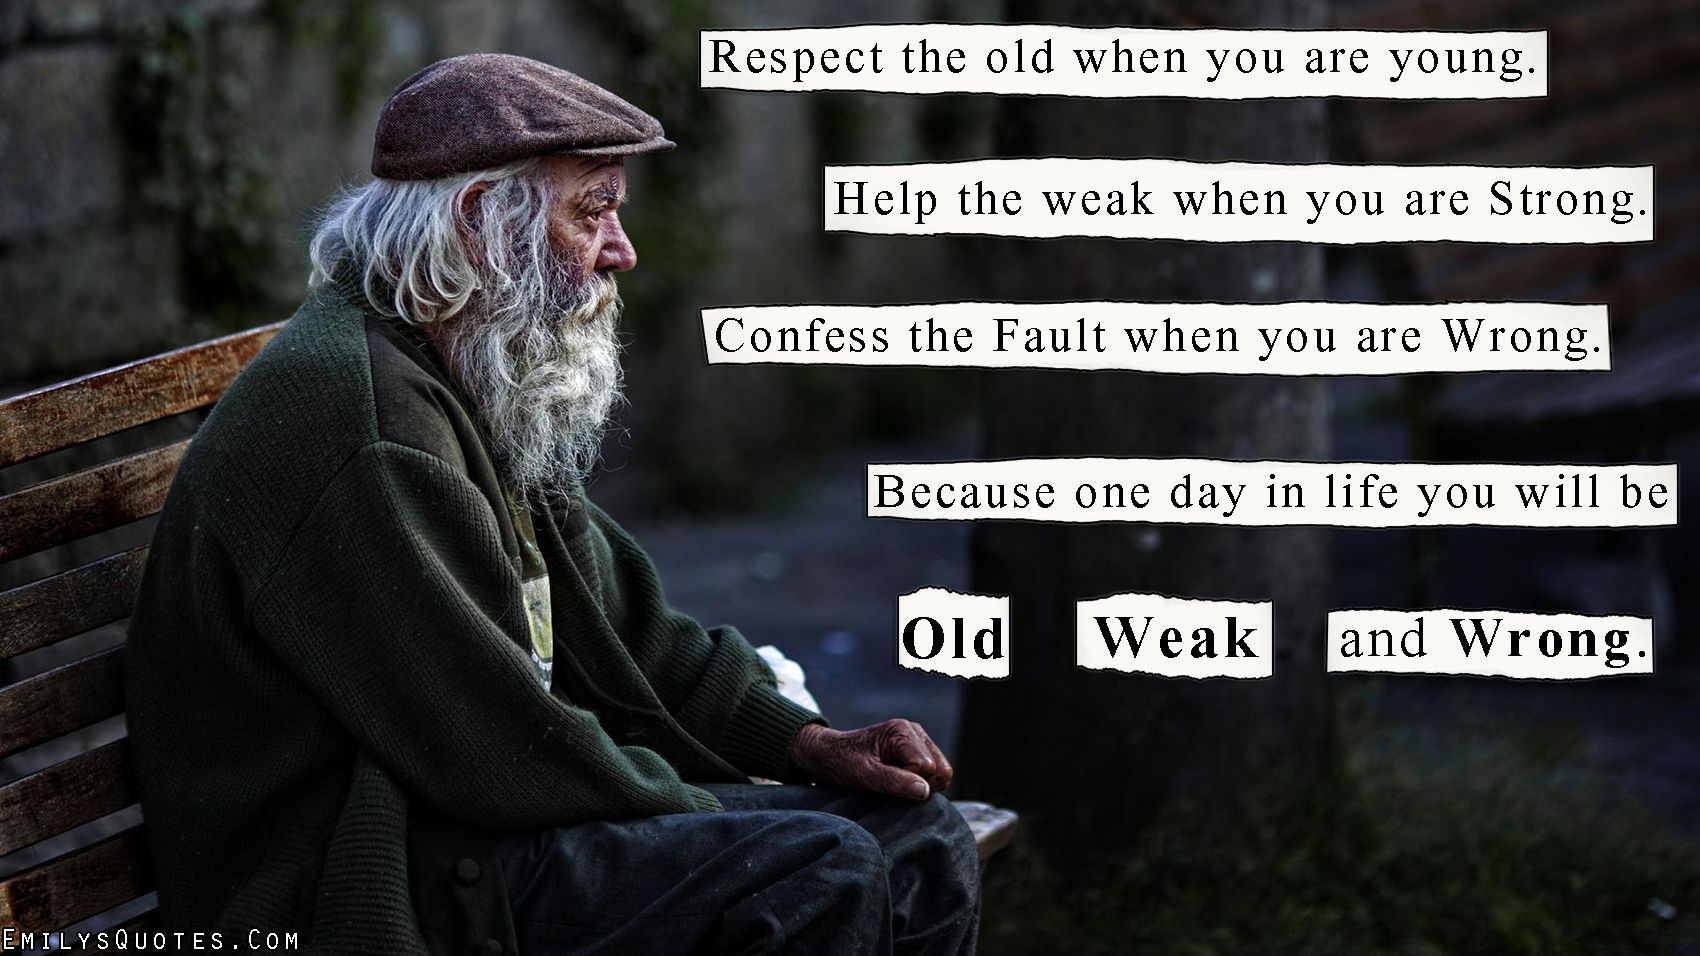 Respect the old when you are young. Help the weak when you are strong. Confess your fault when you are wrong because one day in life you will be old, weak and wrong.